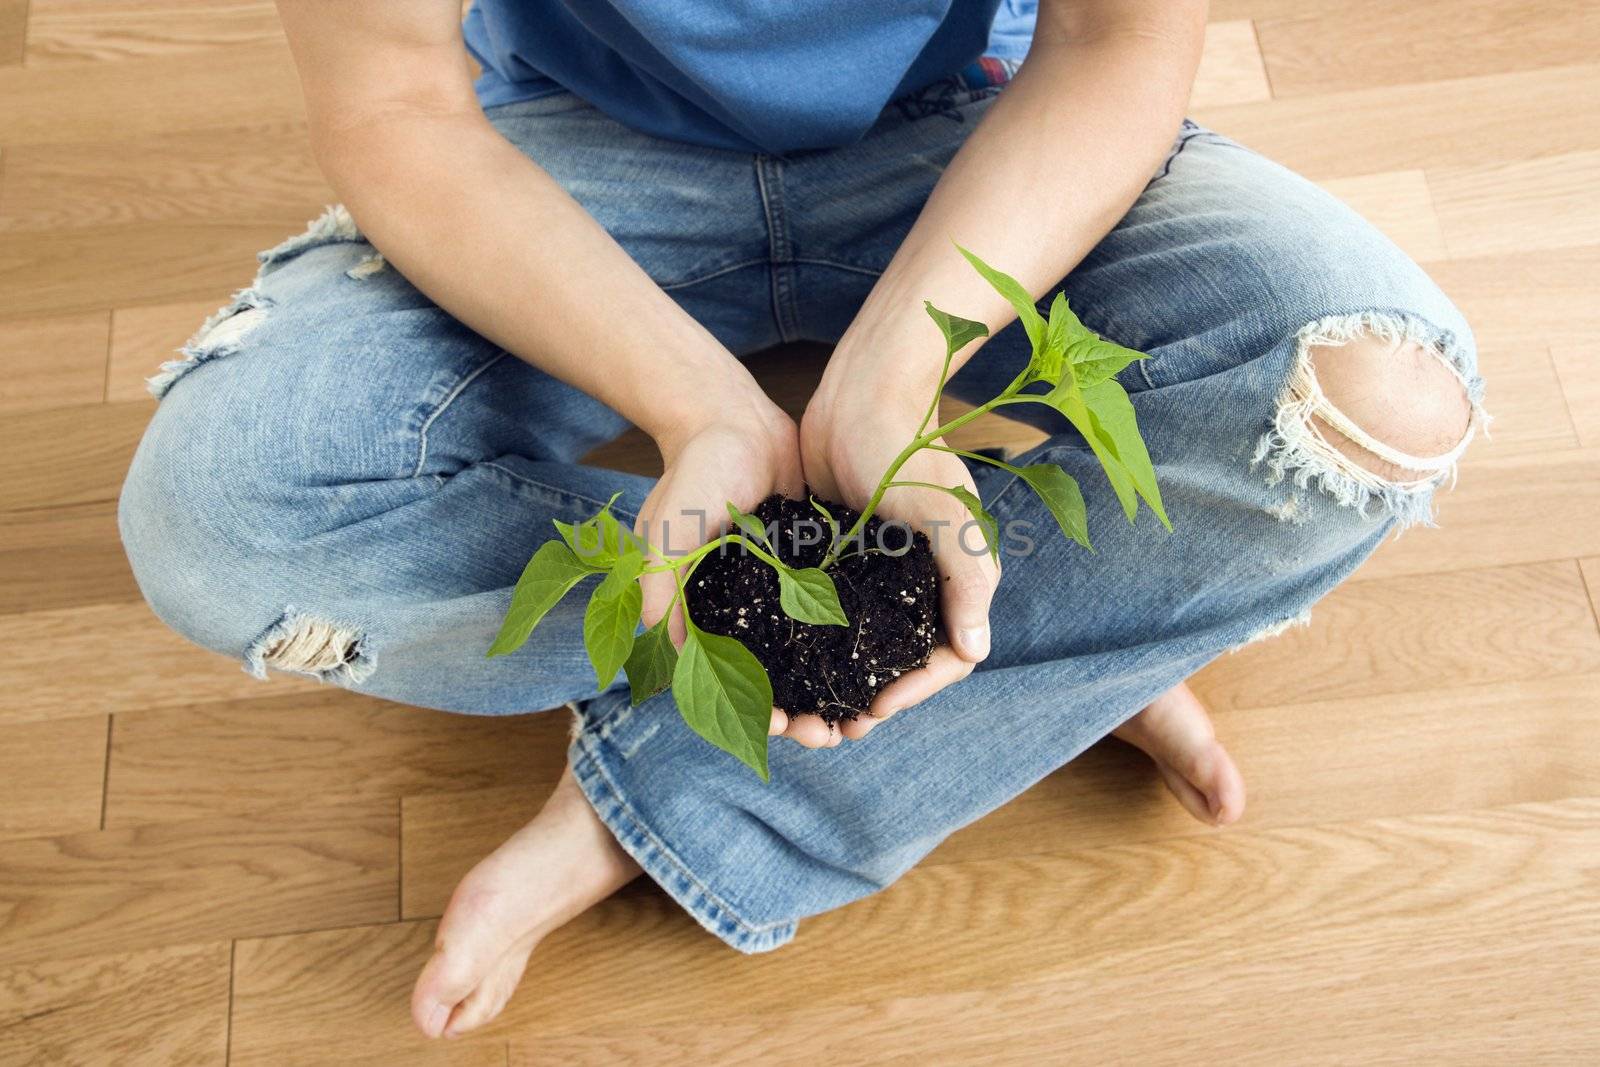 Man sitting on floor holding growing cayenne plant.